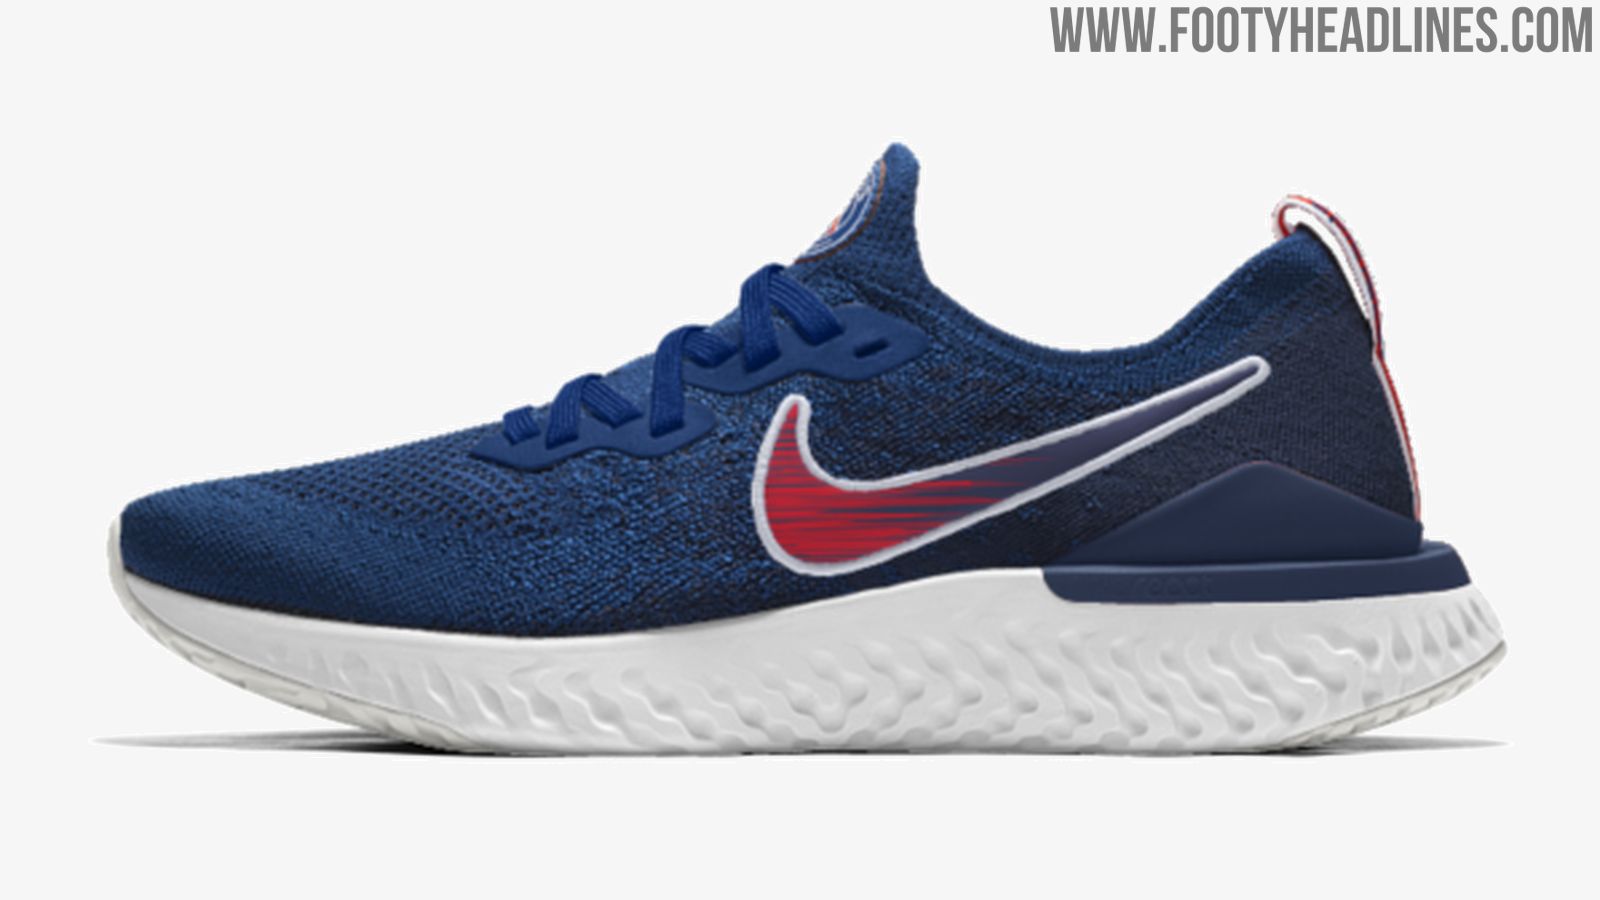 Navy / Red Nike x PSG Epic React Flyknit 2 Shoes Launched - Footy Headlines